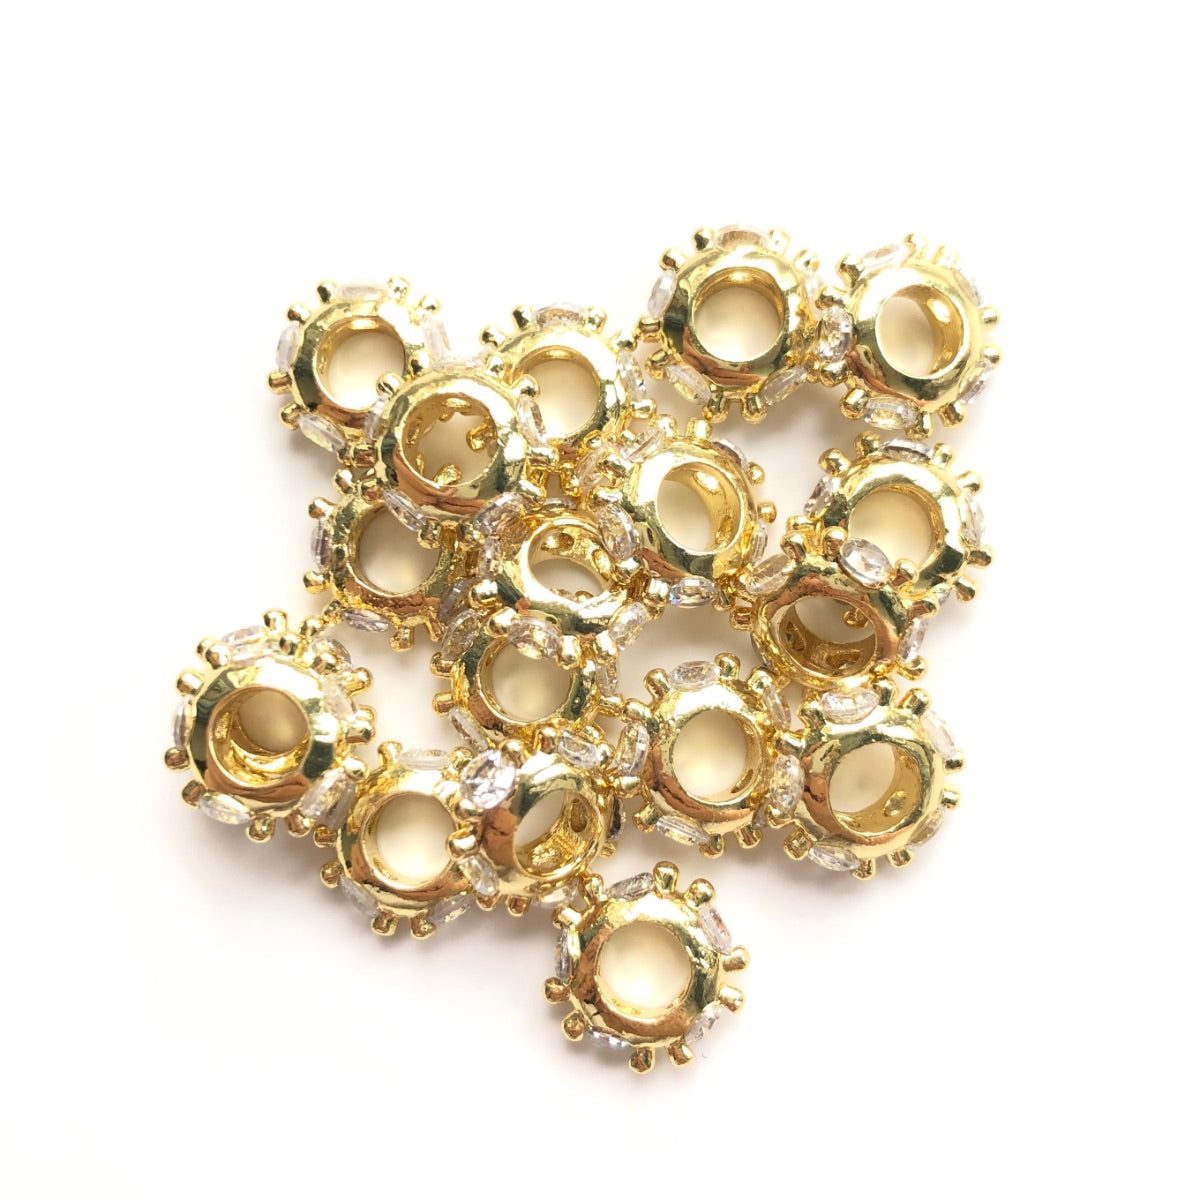 20pcs/lot 10*3mm Big Size CZ Pave Wheel Rondelle Spacers Gold CZ Paved Spacers New Spacers Arrivals Rondelle Beads Charms Beads Beyond